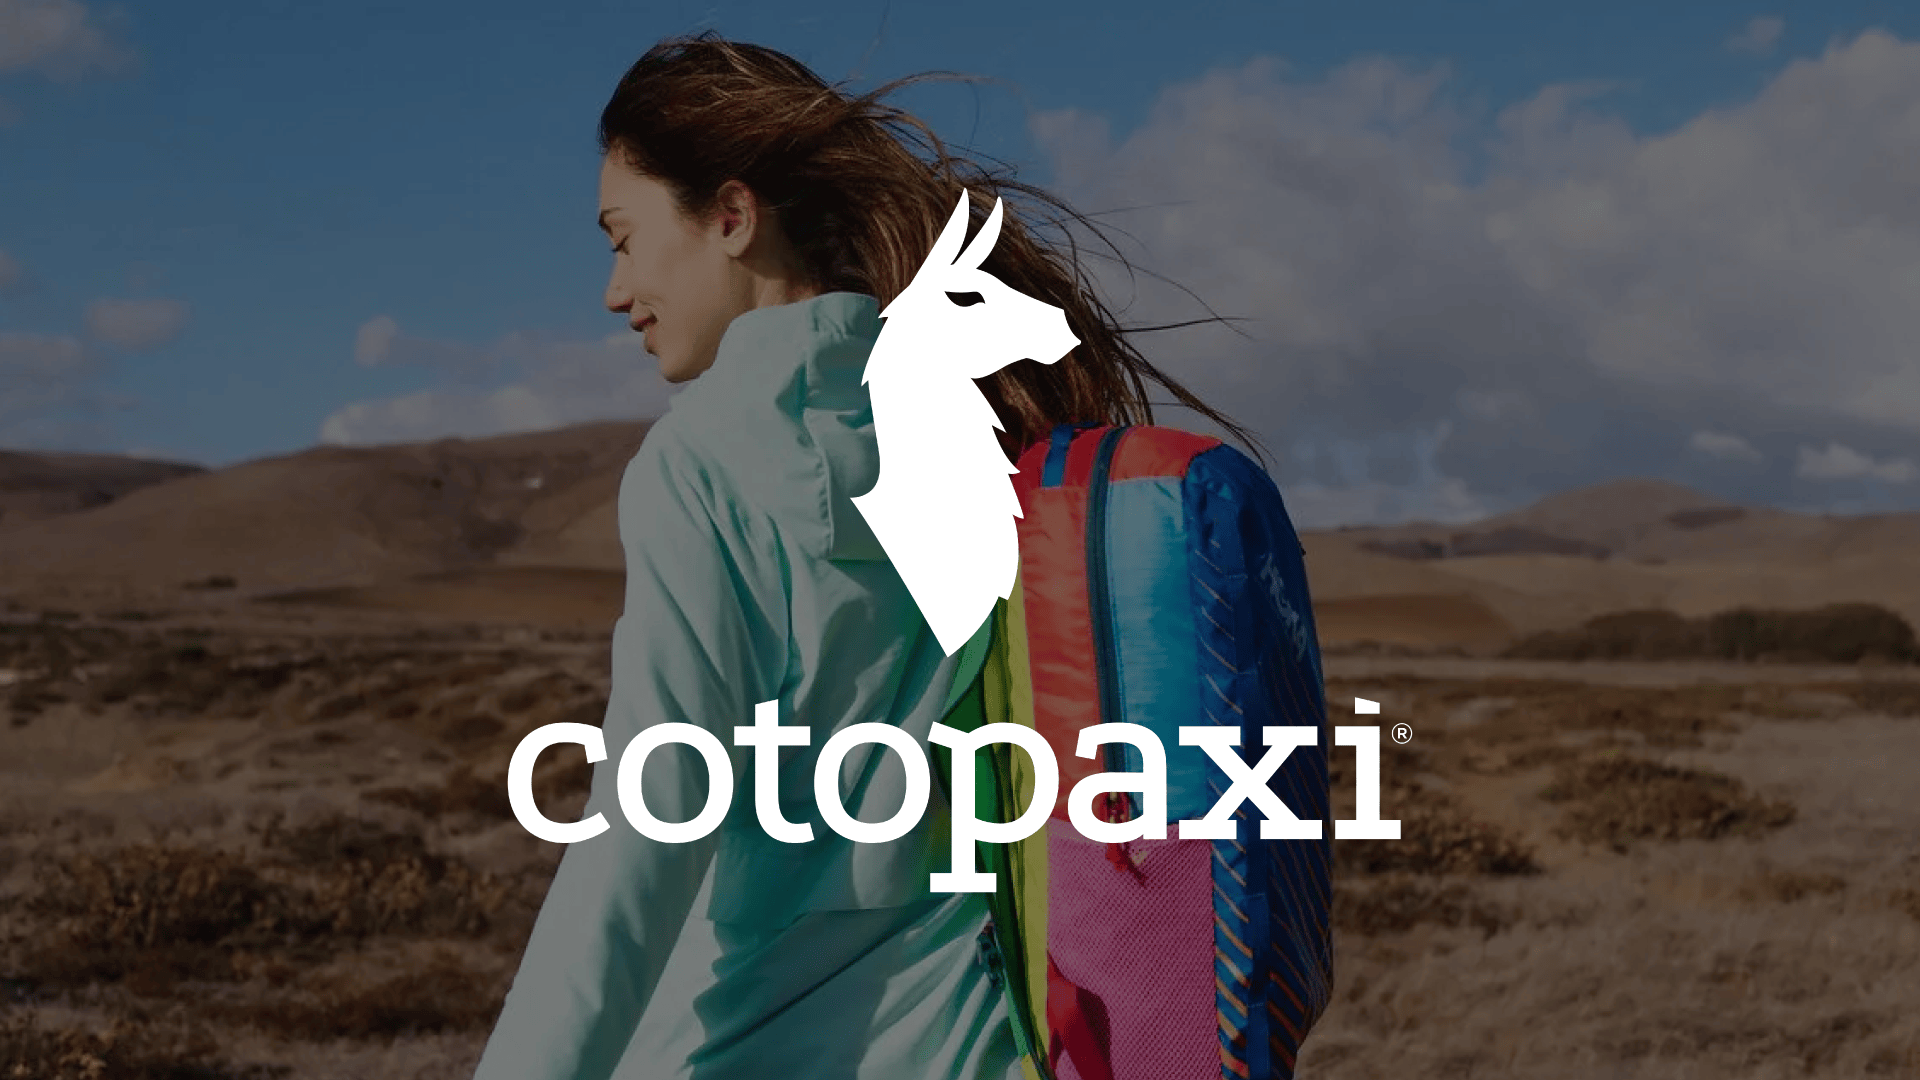 Cotopaxi header image with brand photography and logo